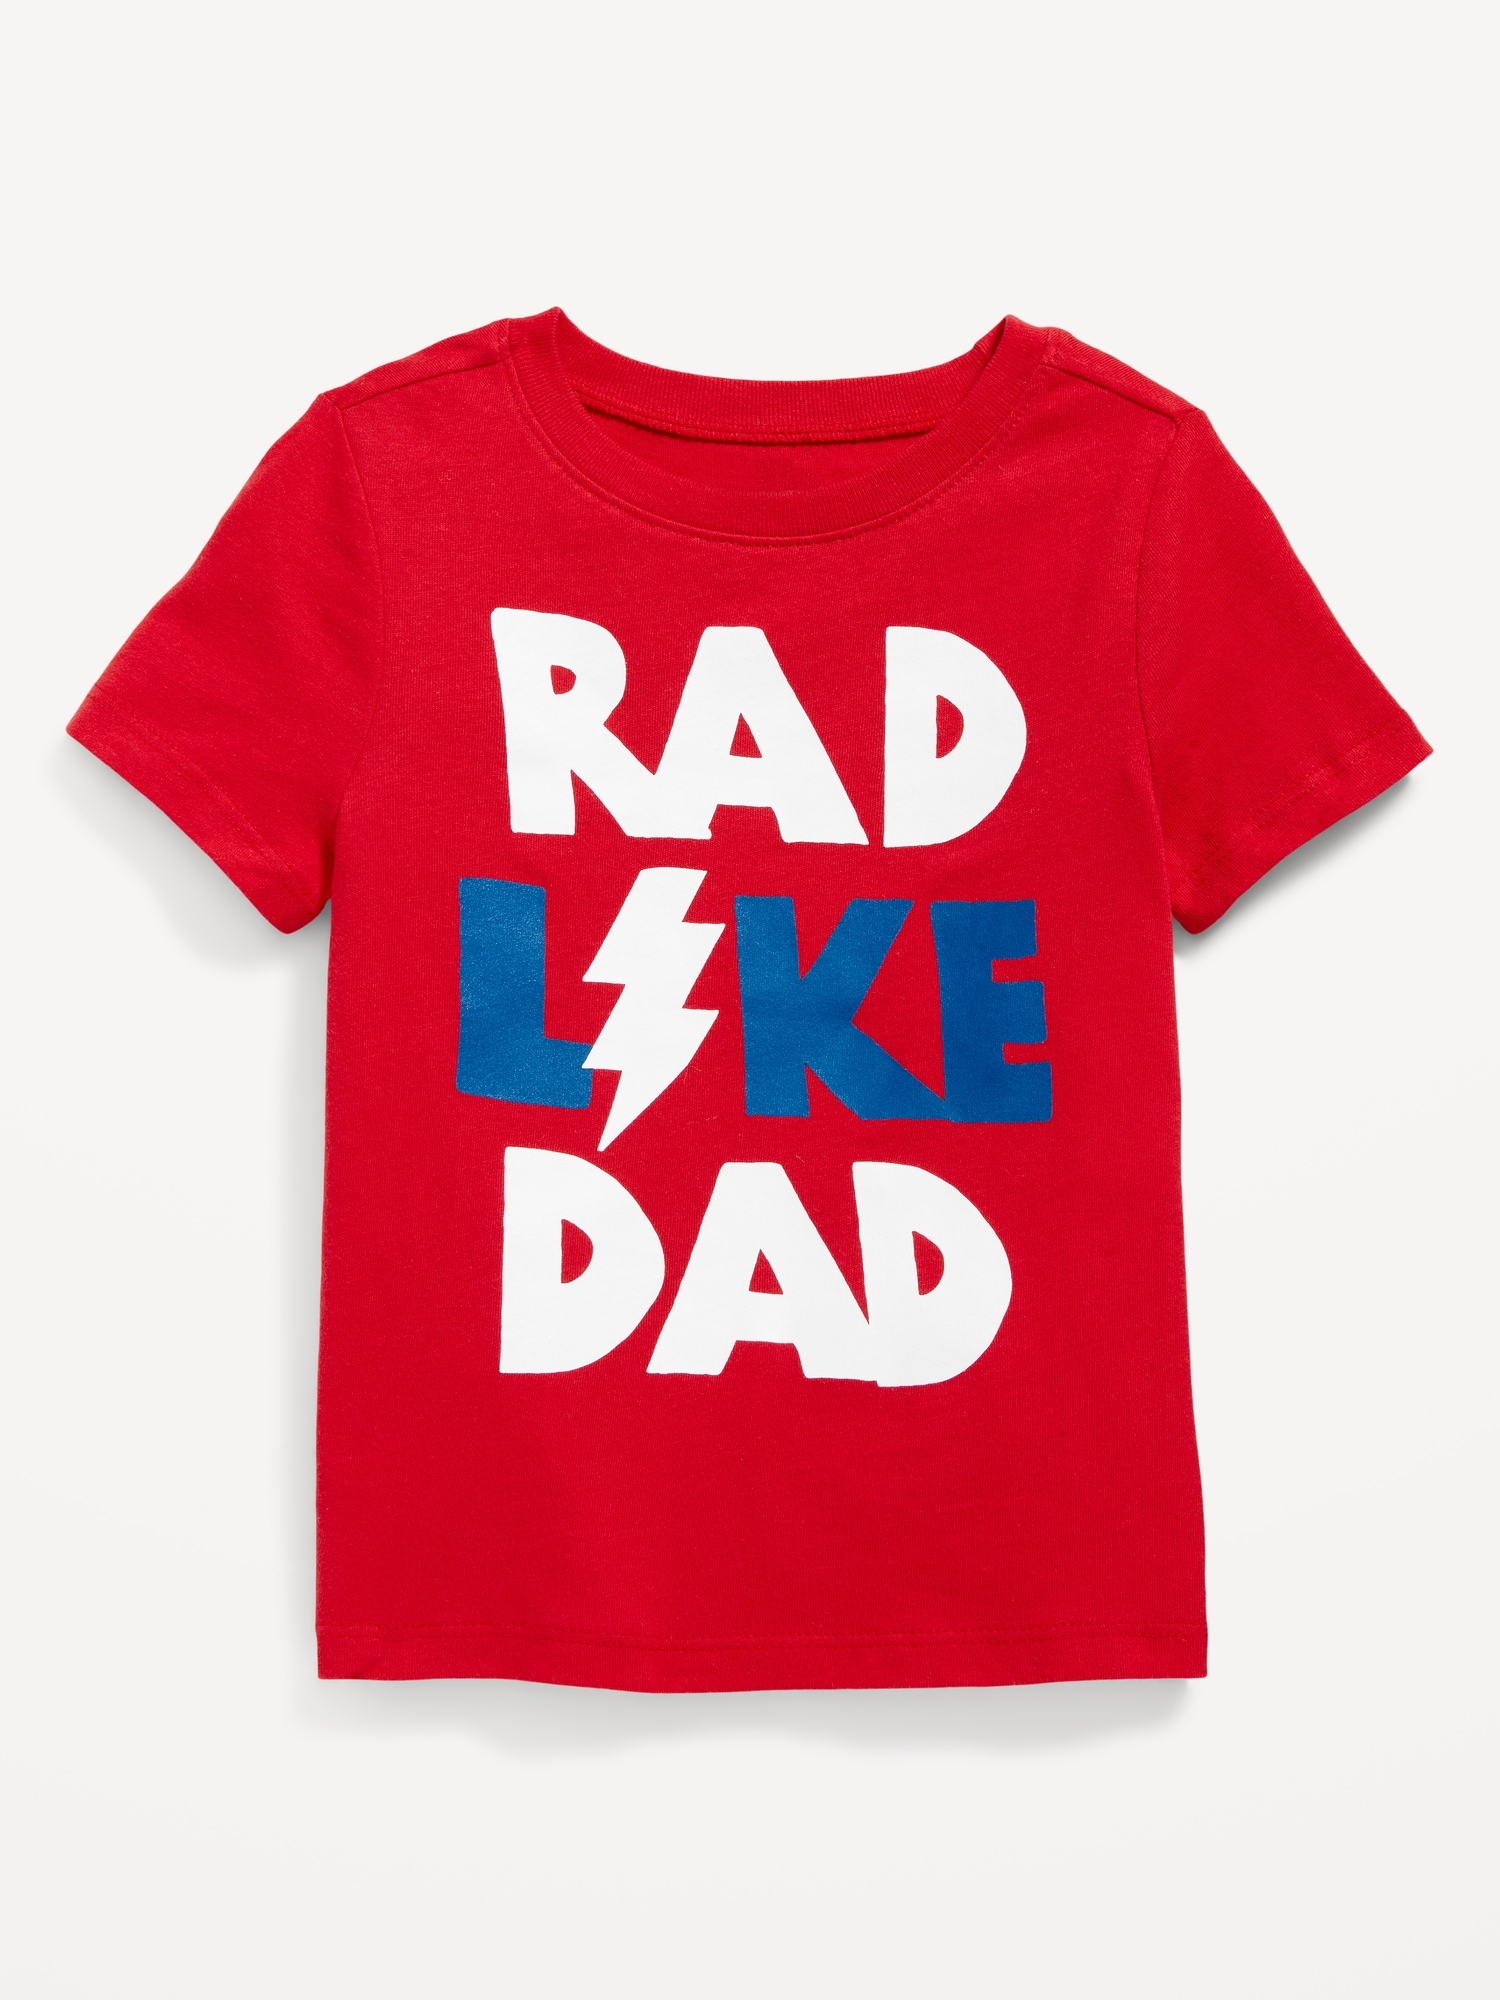 Short-Sleeve Graphic T-Shirt for Toddler Boys Hot Deal